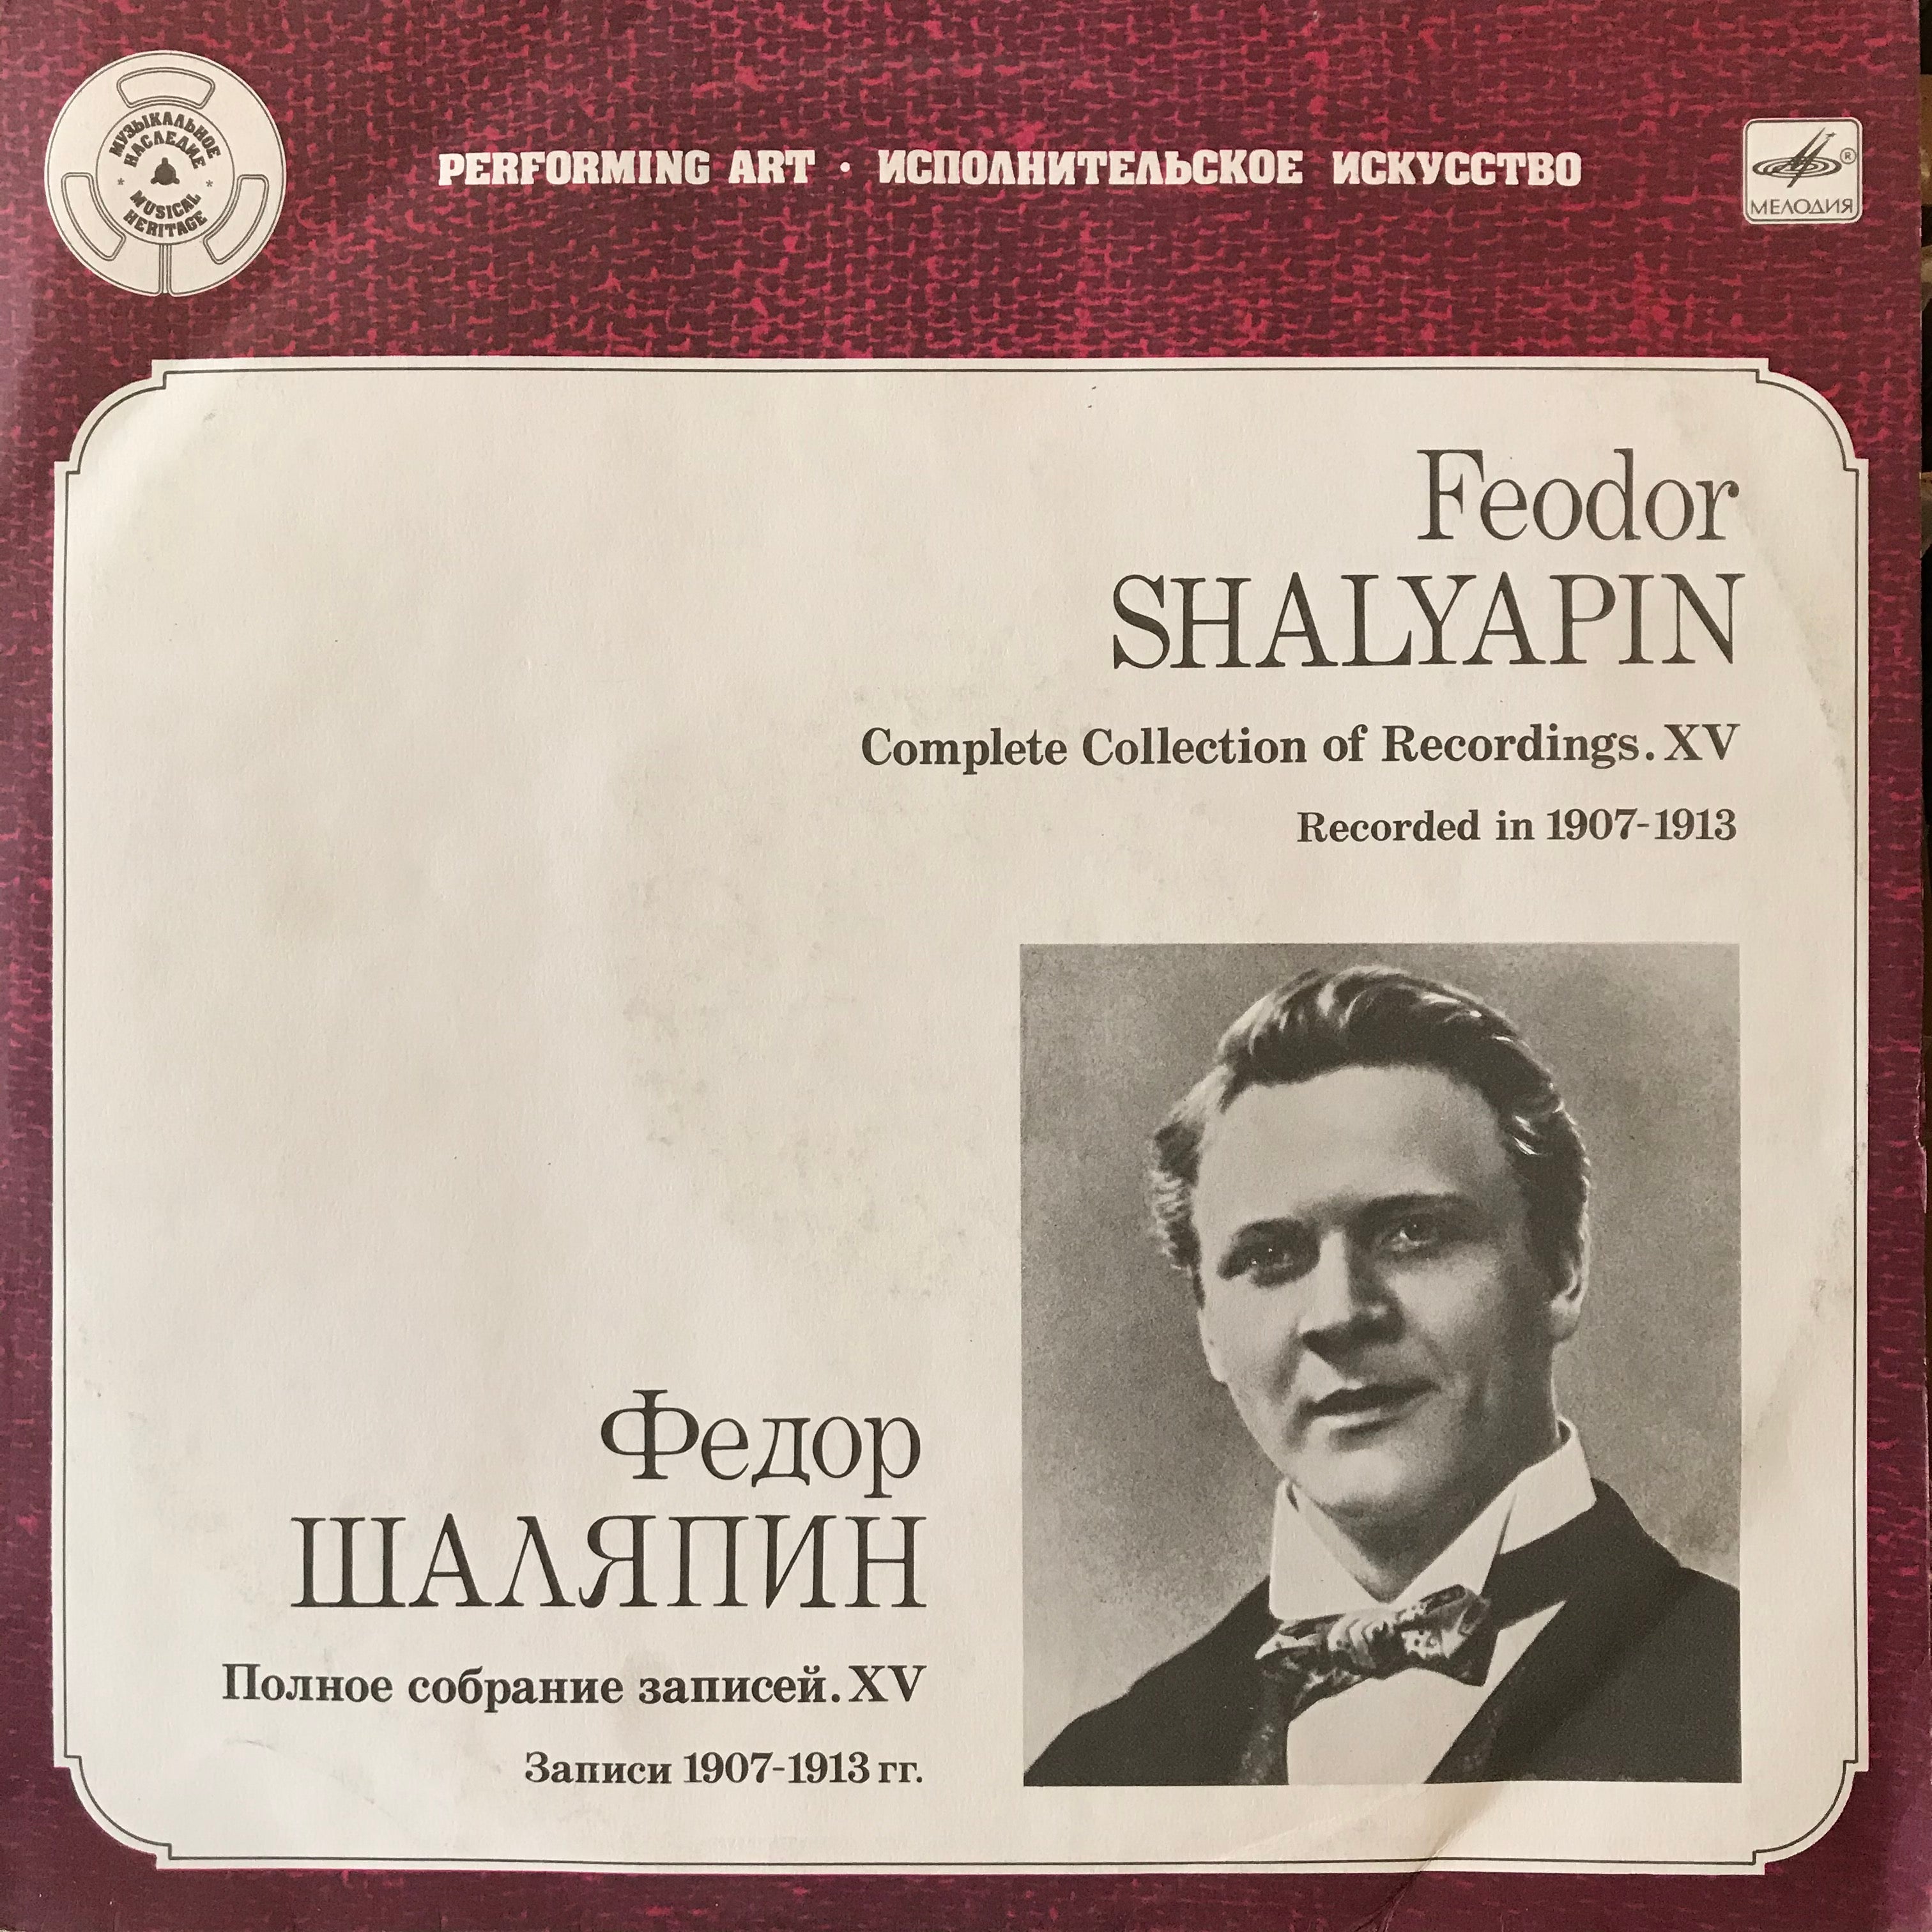 Fedeor Shalyapin; Complete Collection of Recordings. XV